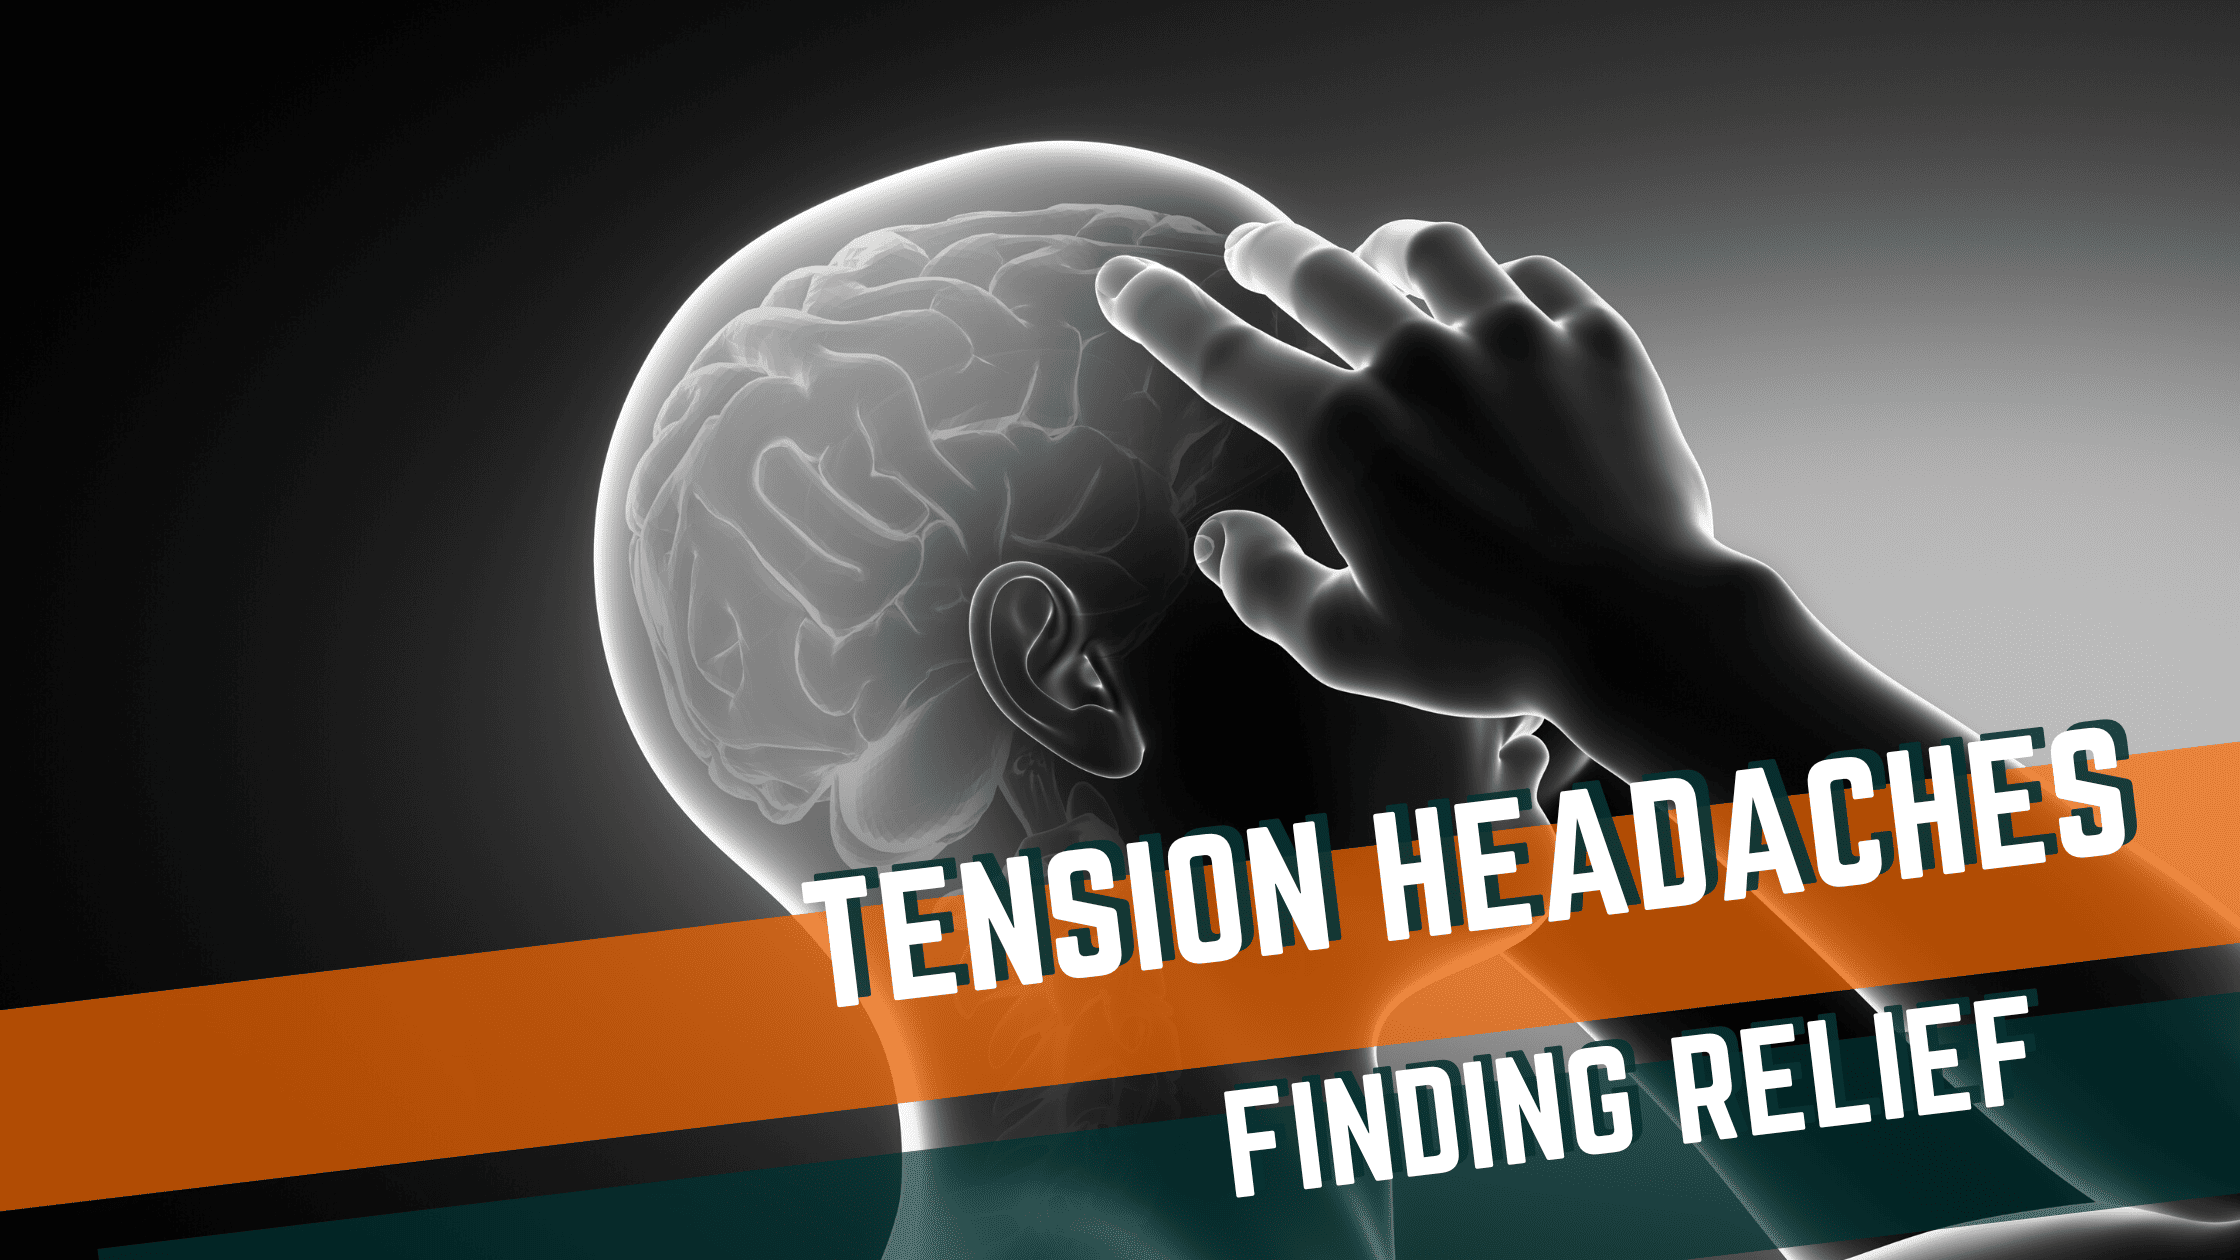 Featured image for “Tension Headaches: Finding Relief”